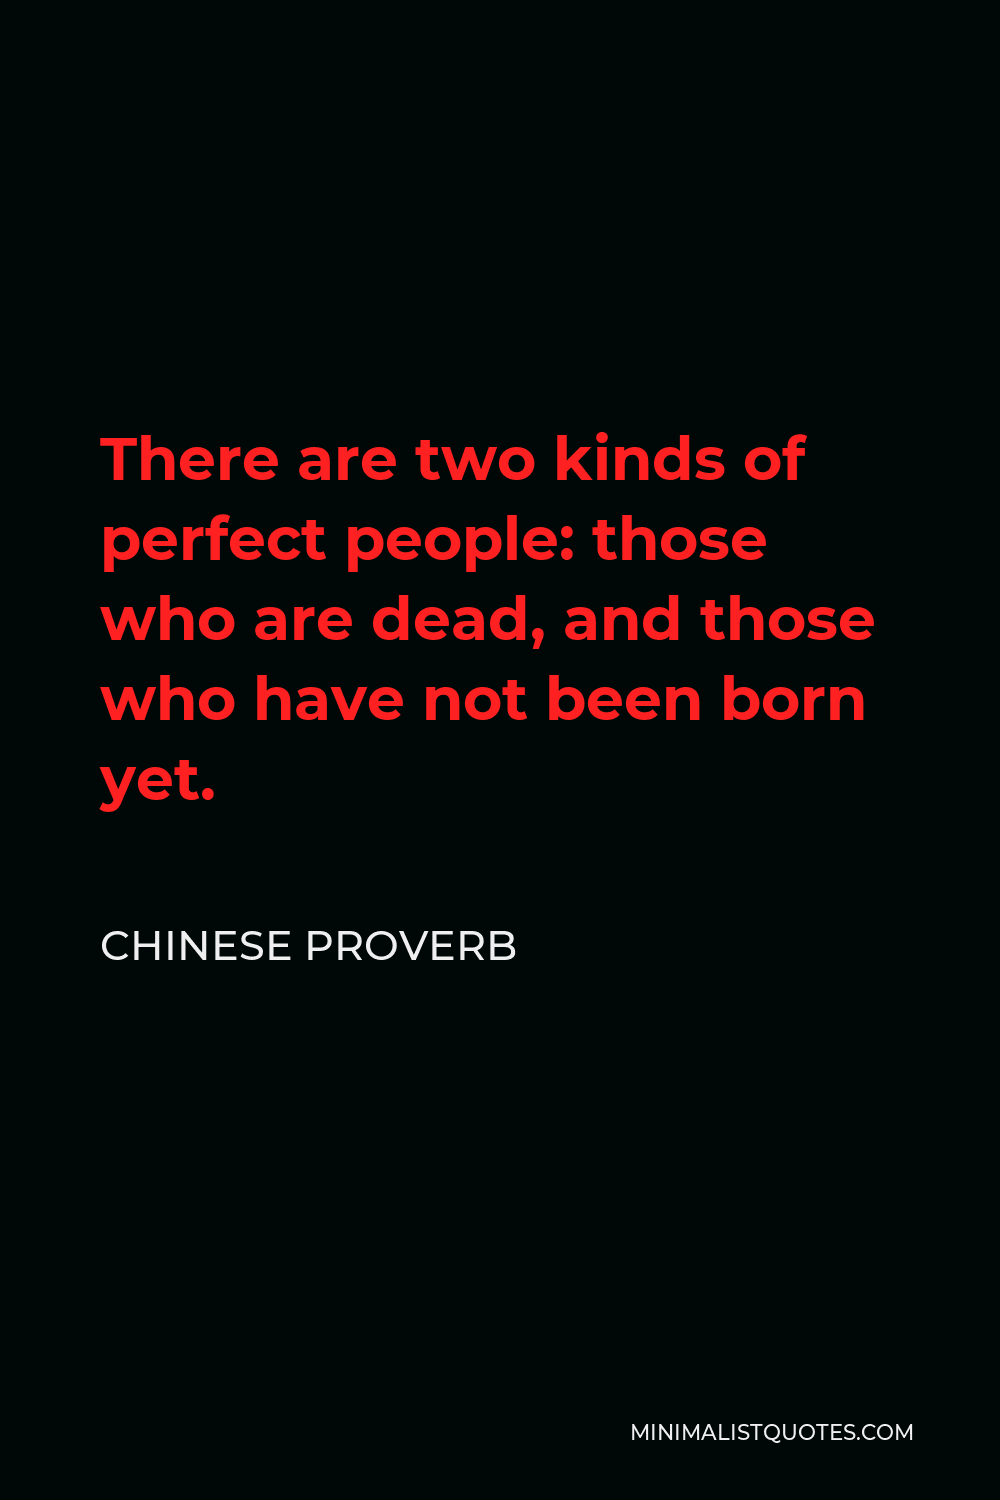 Chinese Proverb Quote - There are two kinds of perfect people: those who are dead, and those who have not been born yet.